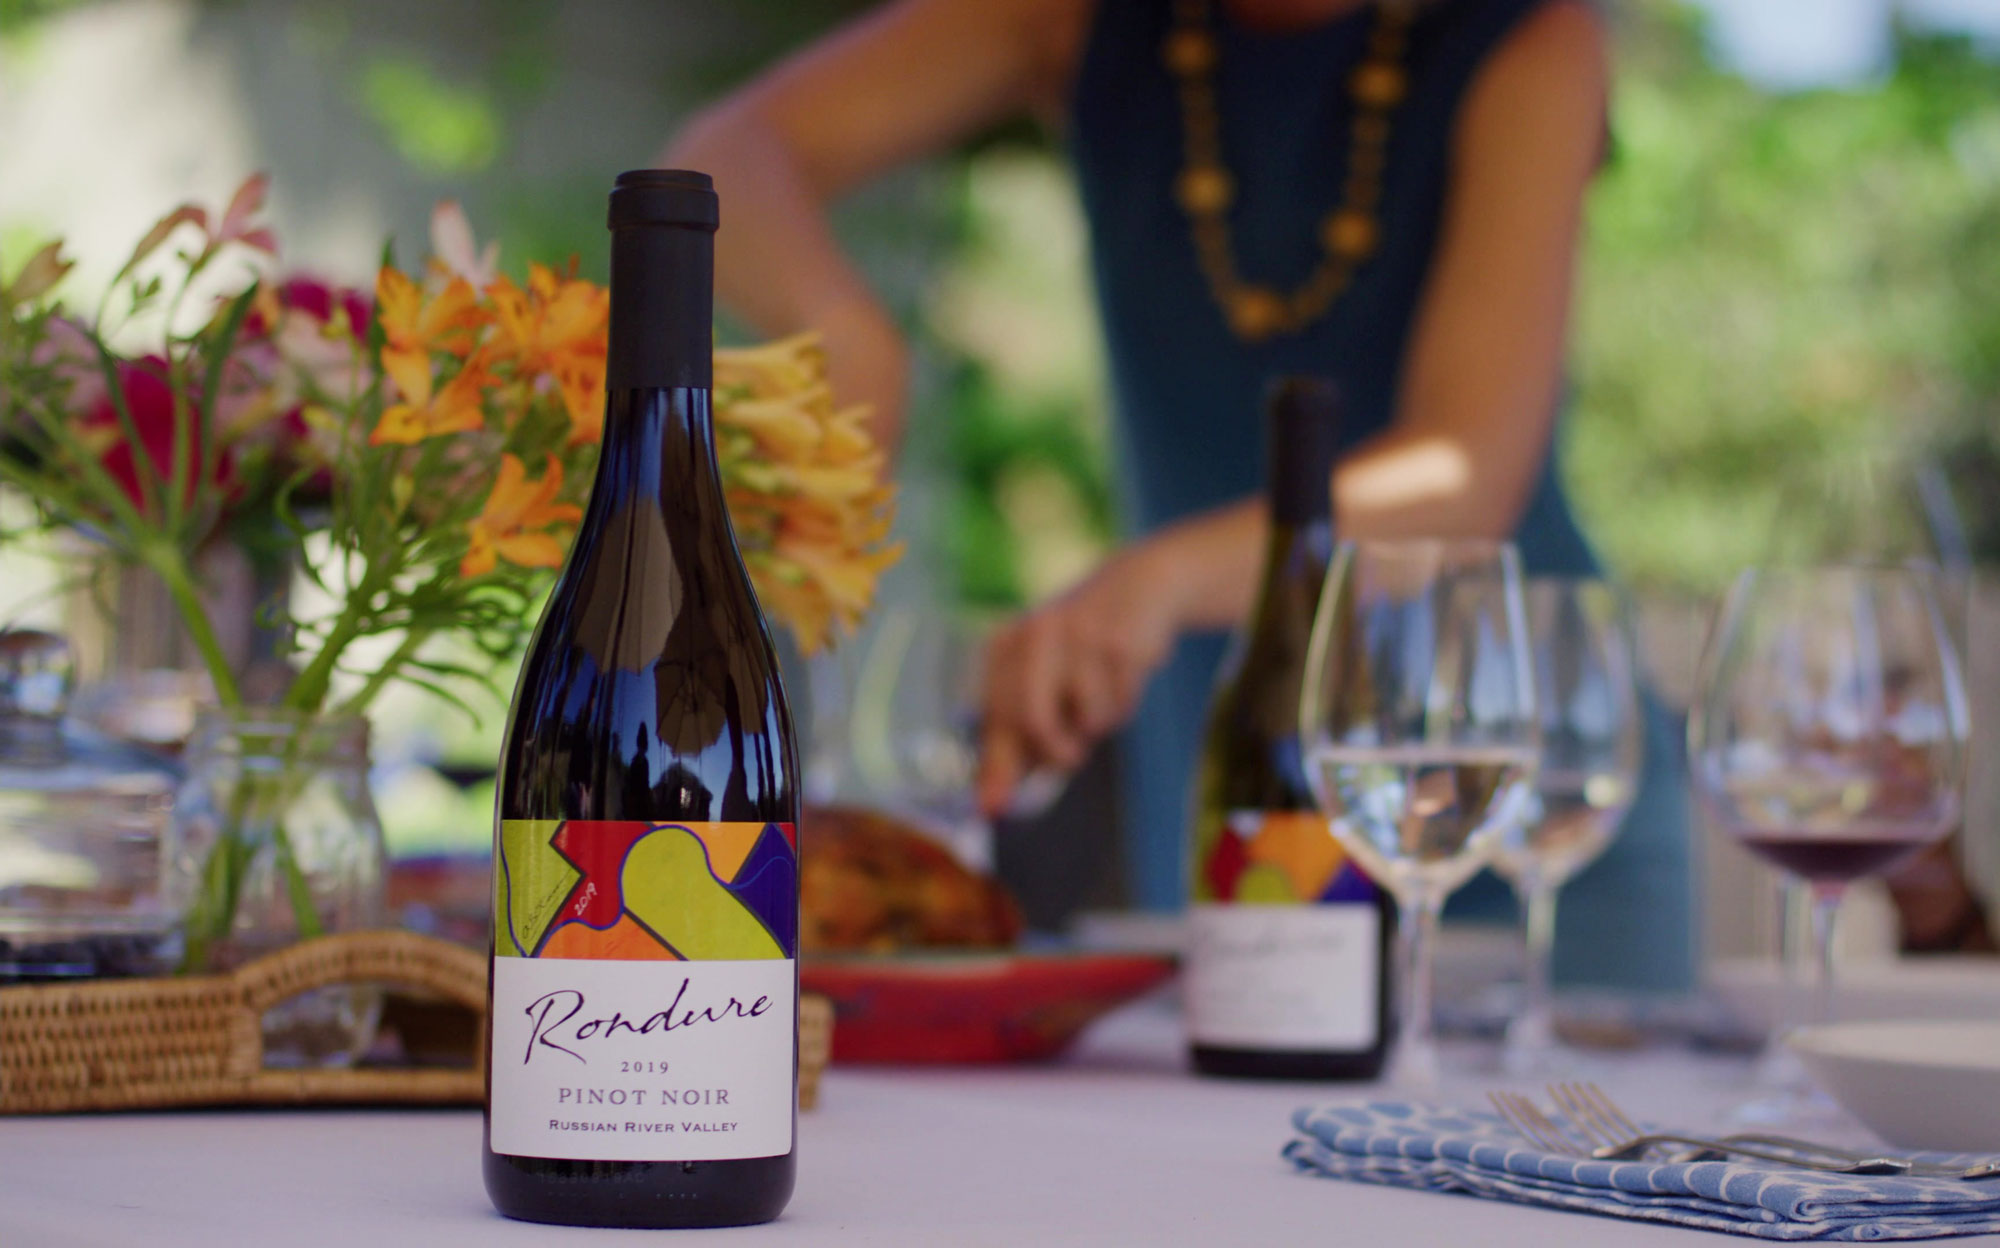 Rondure Pinot noir is perfect on every table